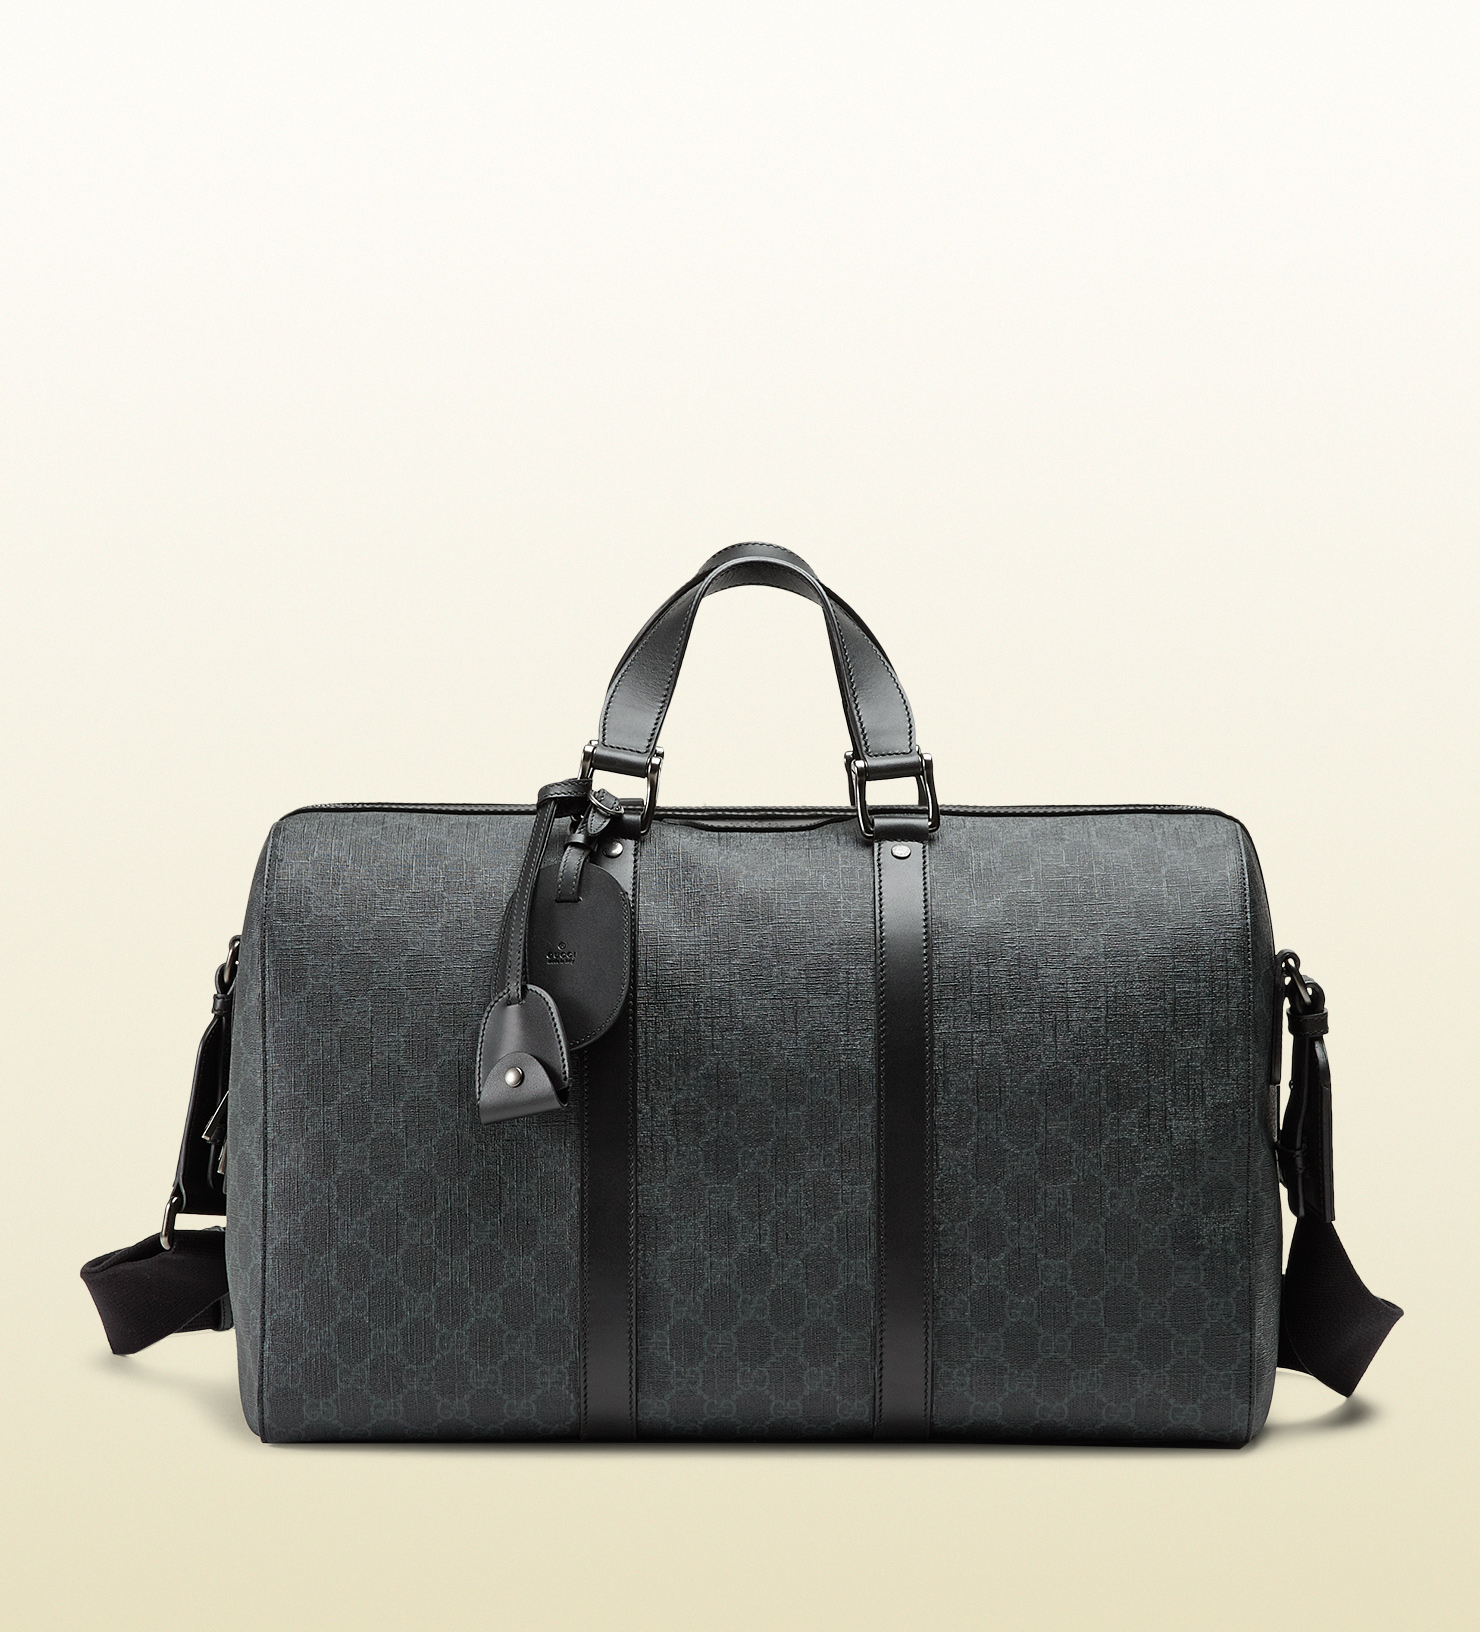 Lyst - Gucci Gg Supreme Canvas Carry-on Duffle Bag in Black for Men